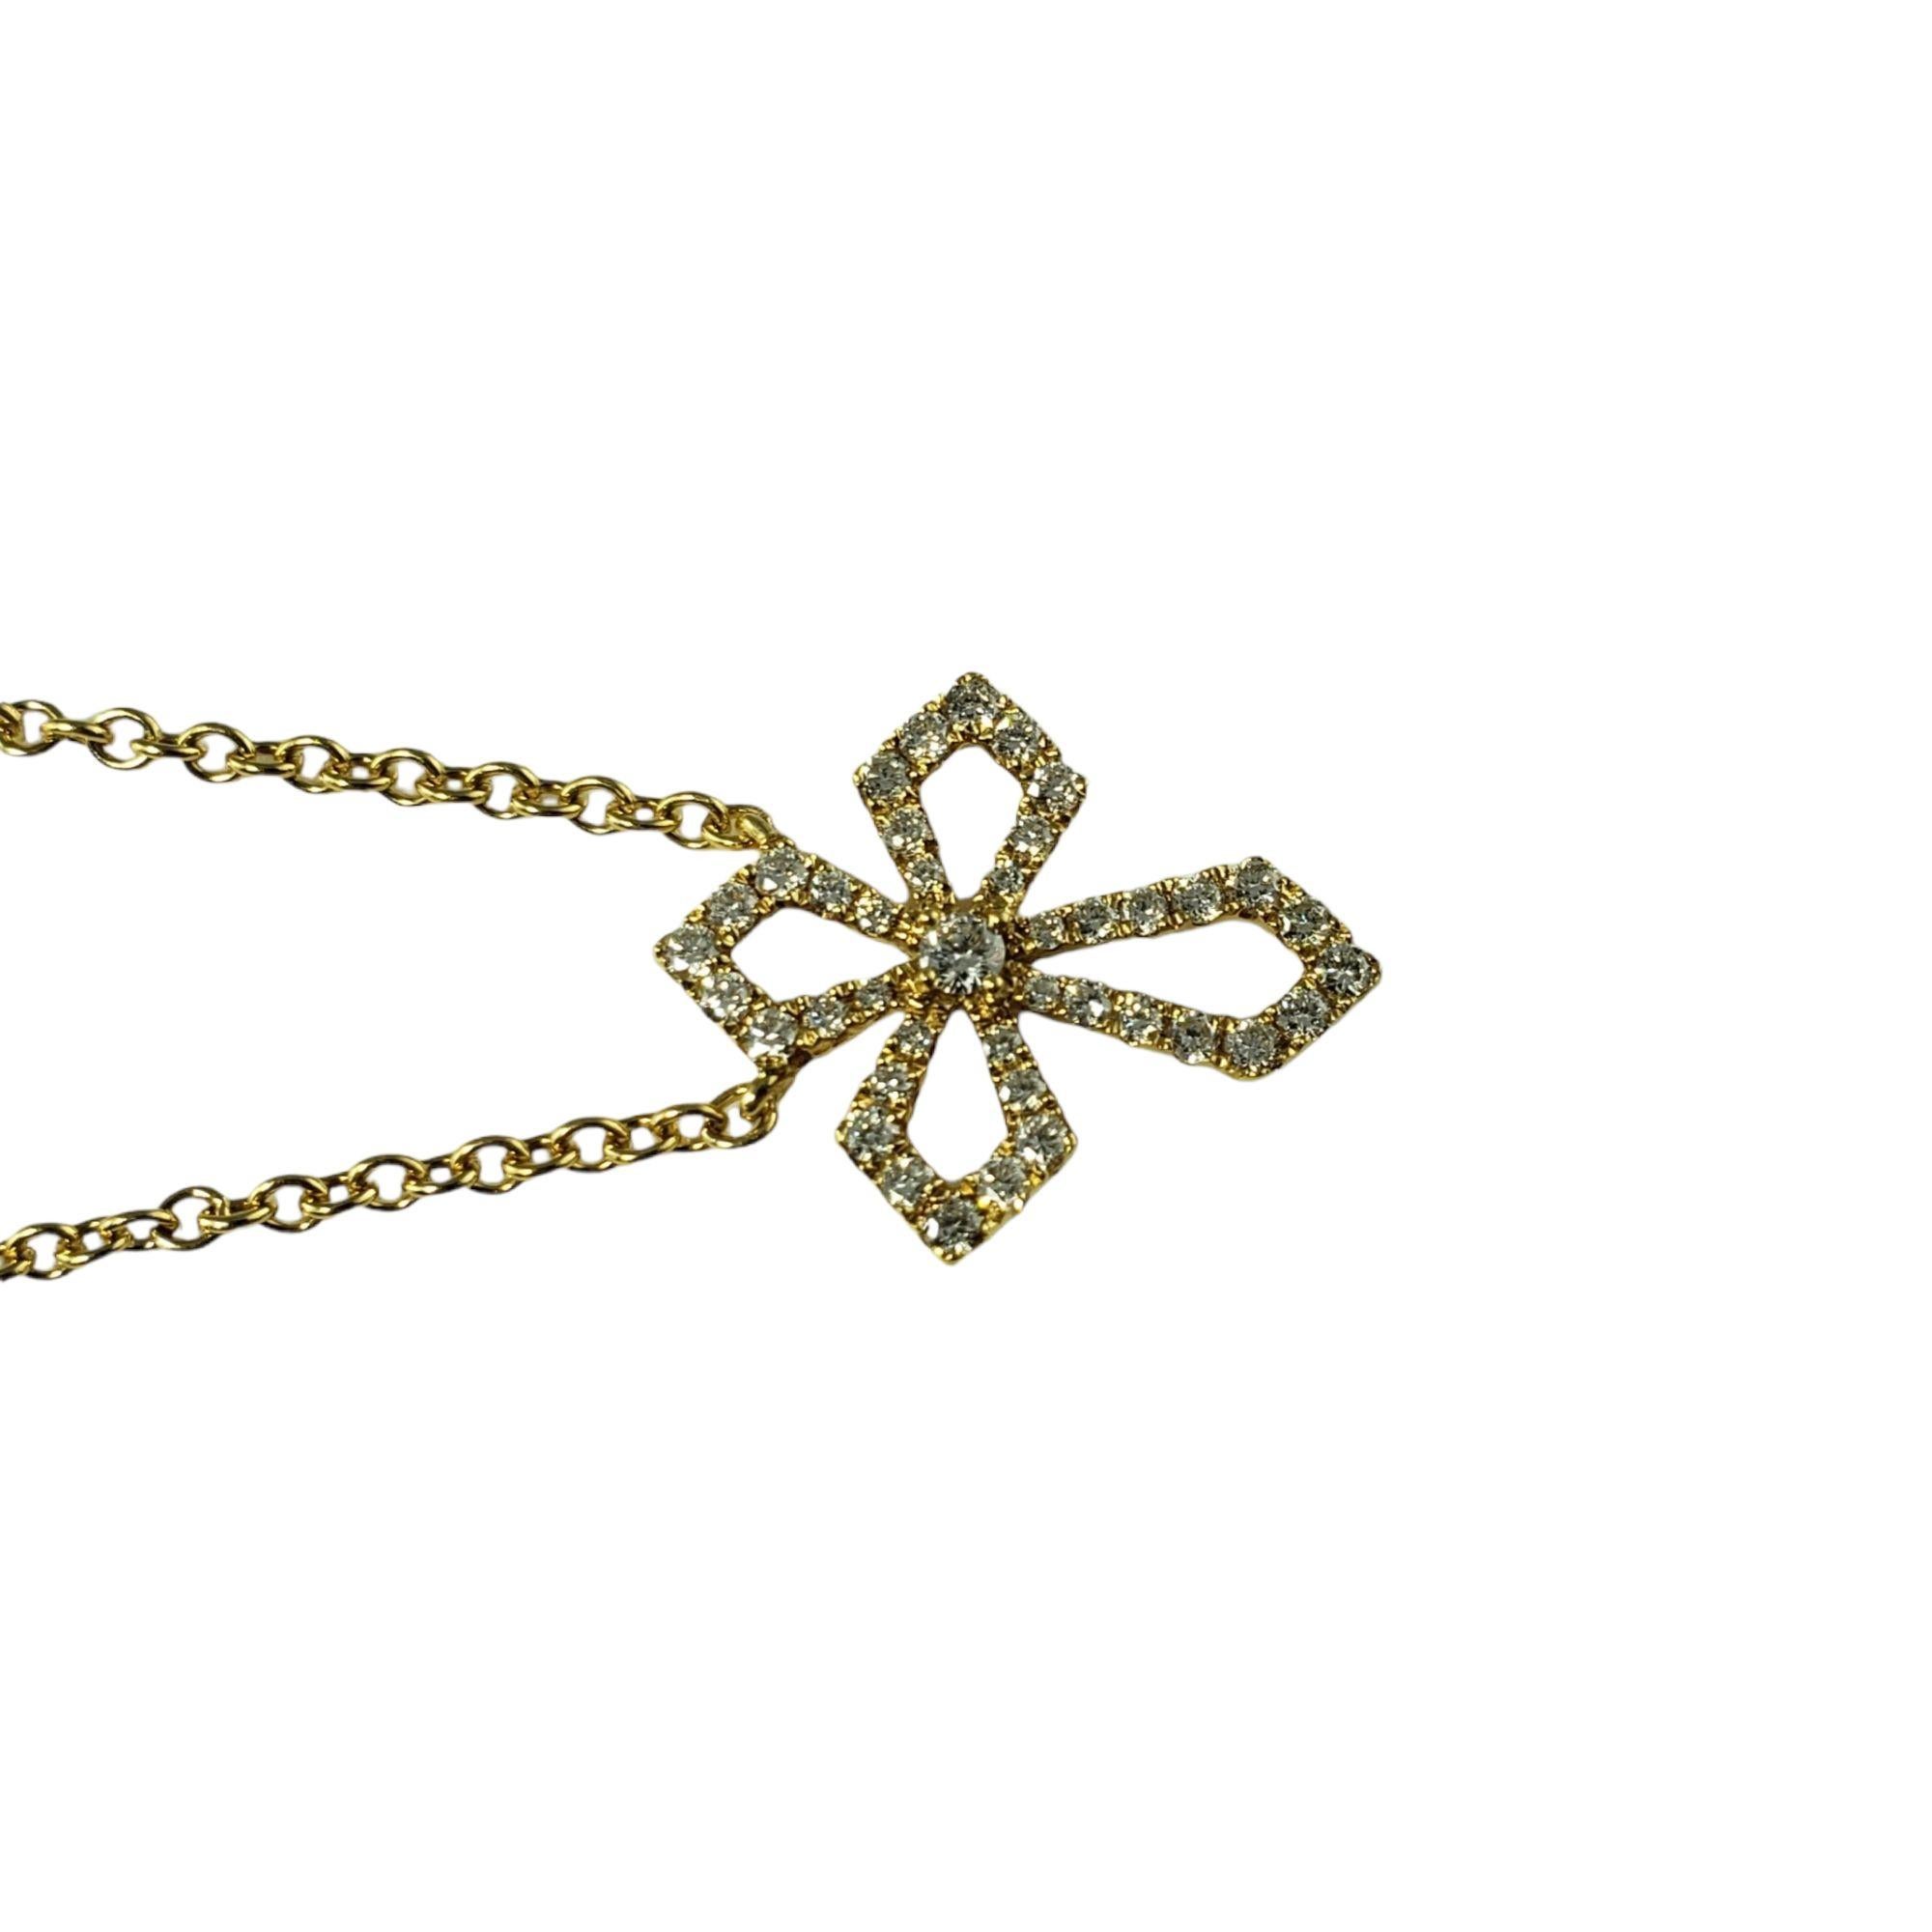 Vintage 18 Karat Yellow Gold Diamond Cross Pendant Necklace-

This sparkling cross pendant features 41 round brilliant diamonds set in classic 18K yellow gold. Suspends from a classic cable chain.

Approximate total diamond weight: .21 ct.

Diamond